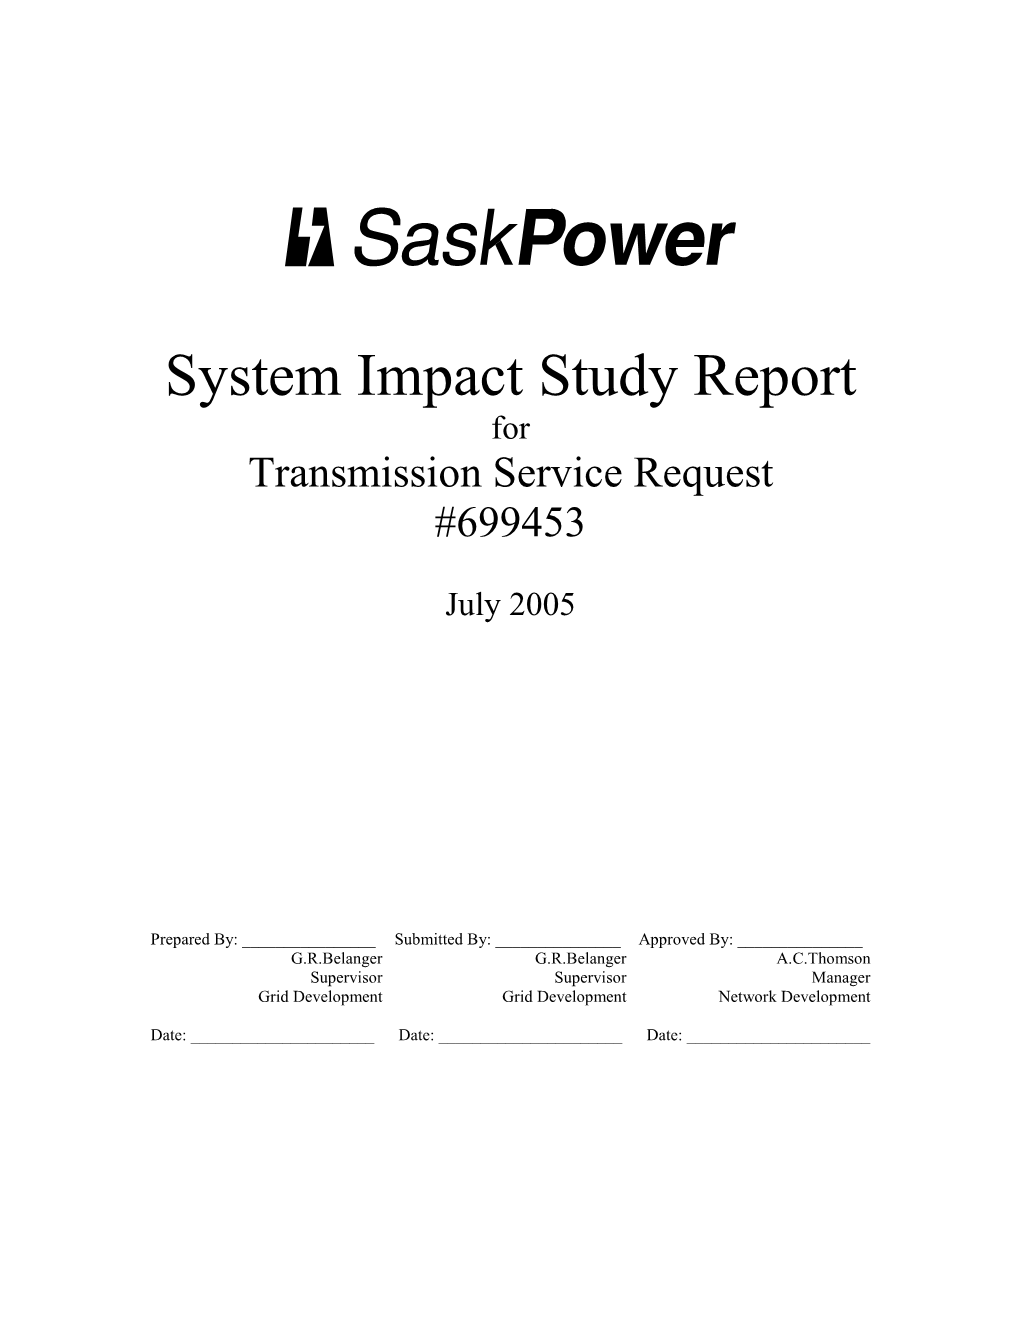 System Impact Study Report for Transmission Service Request #699453